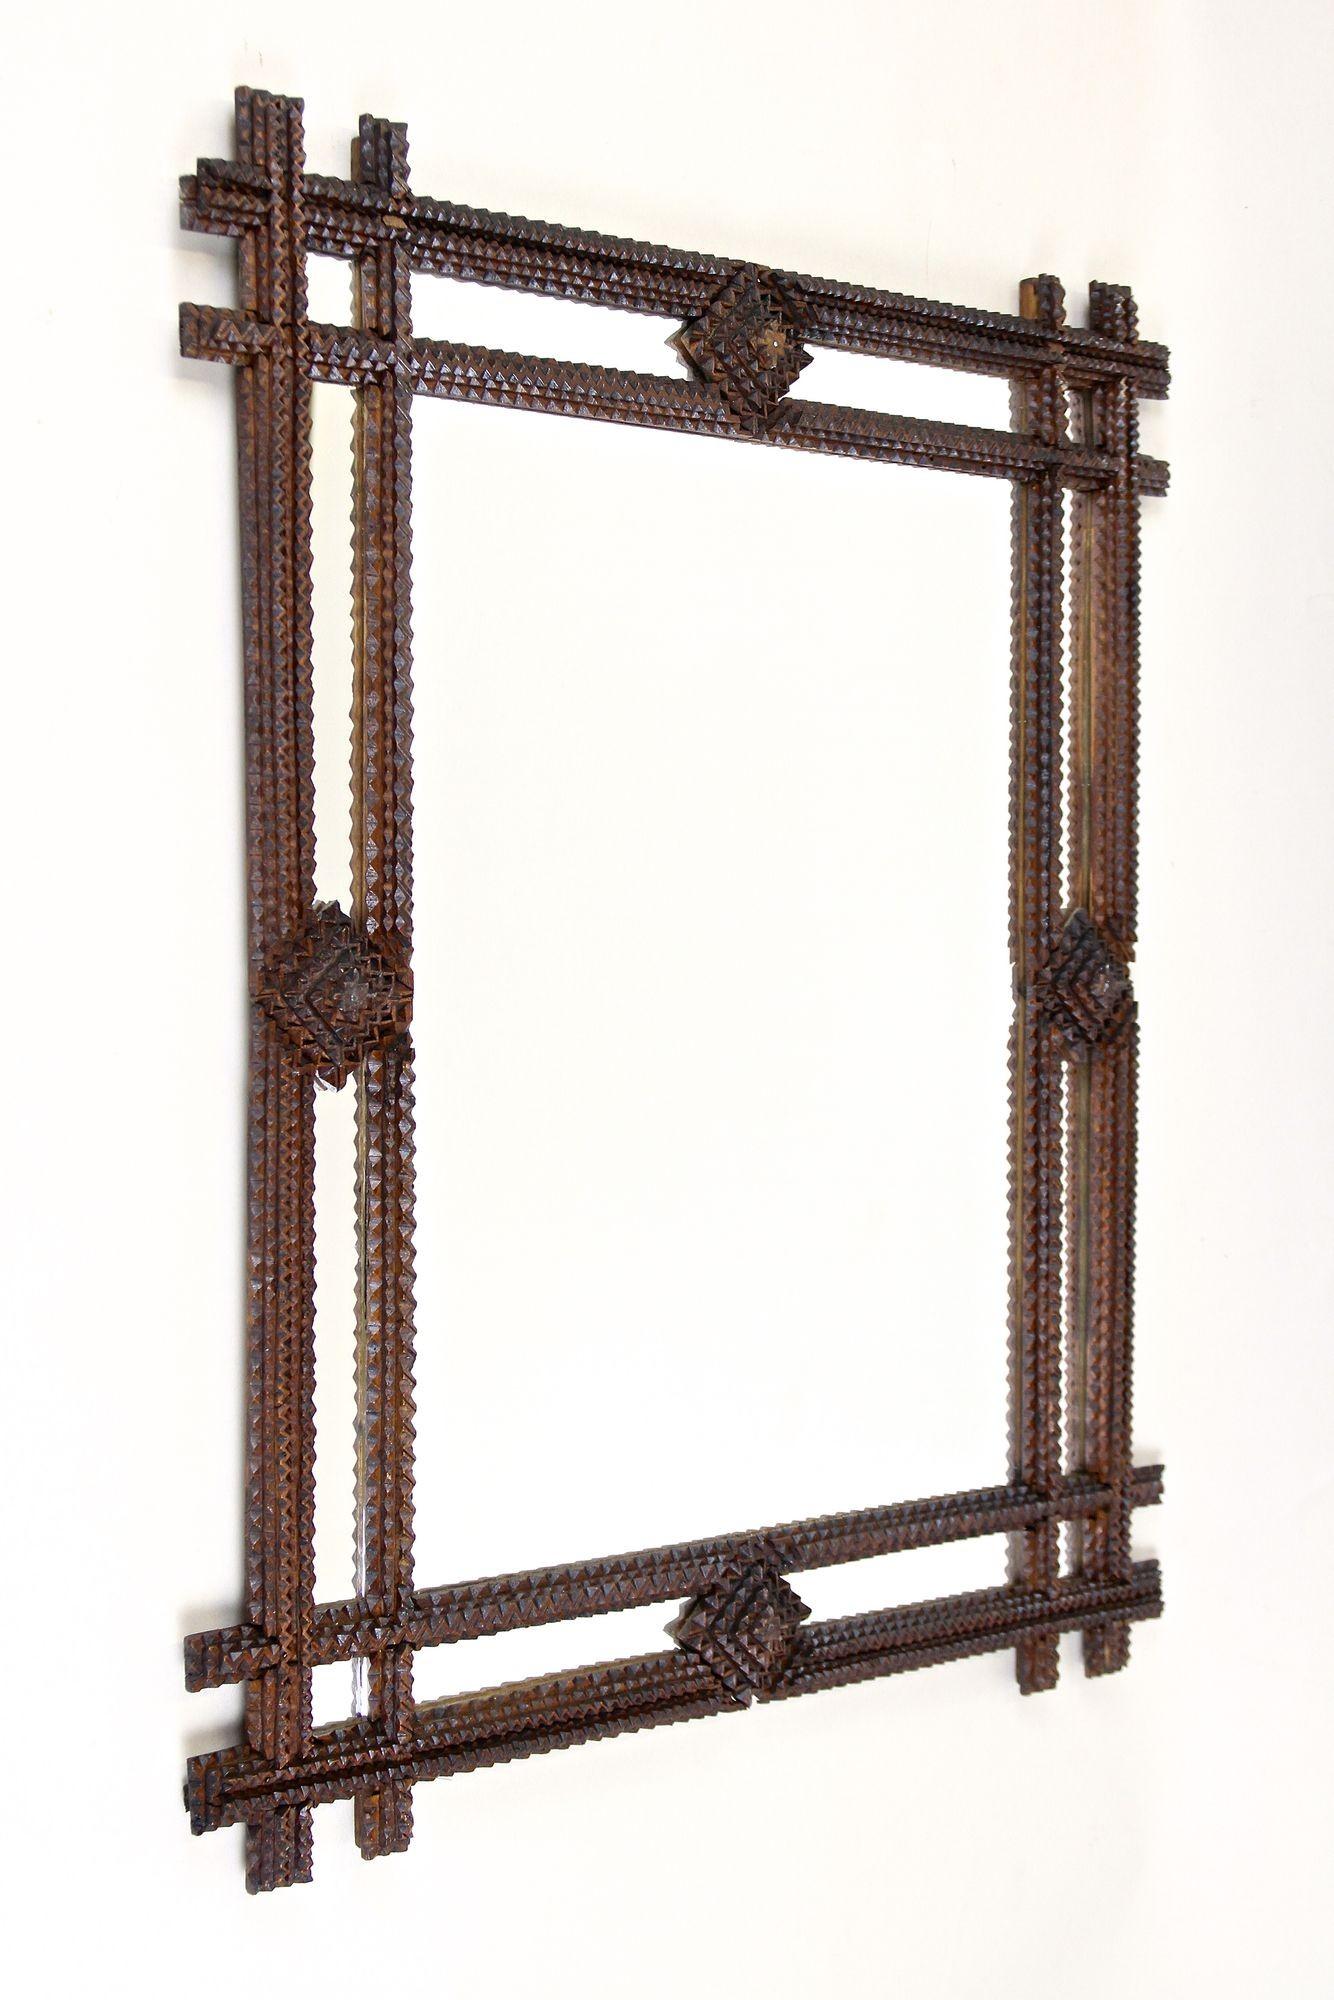 Striking Tramp Art mirror from the period around 1880 in Austria. This remarkable rustic wall mirror impresses with an artfully, absolutely elaborate handcarved design: the doubled frame with slightlyprotruding corners shows very delicate 